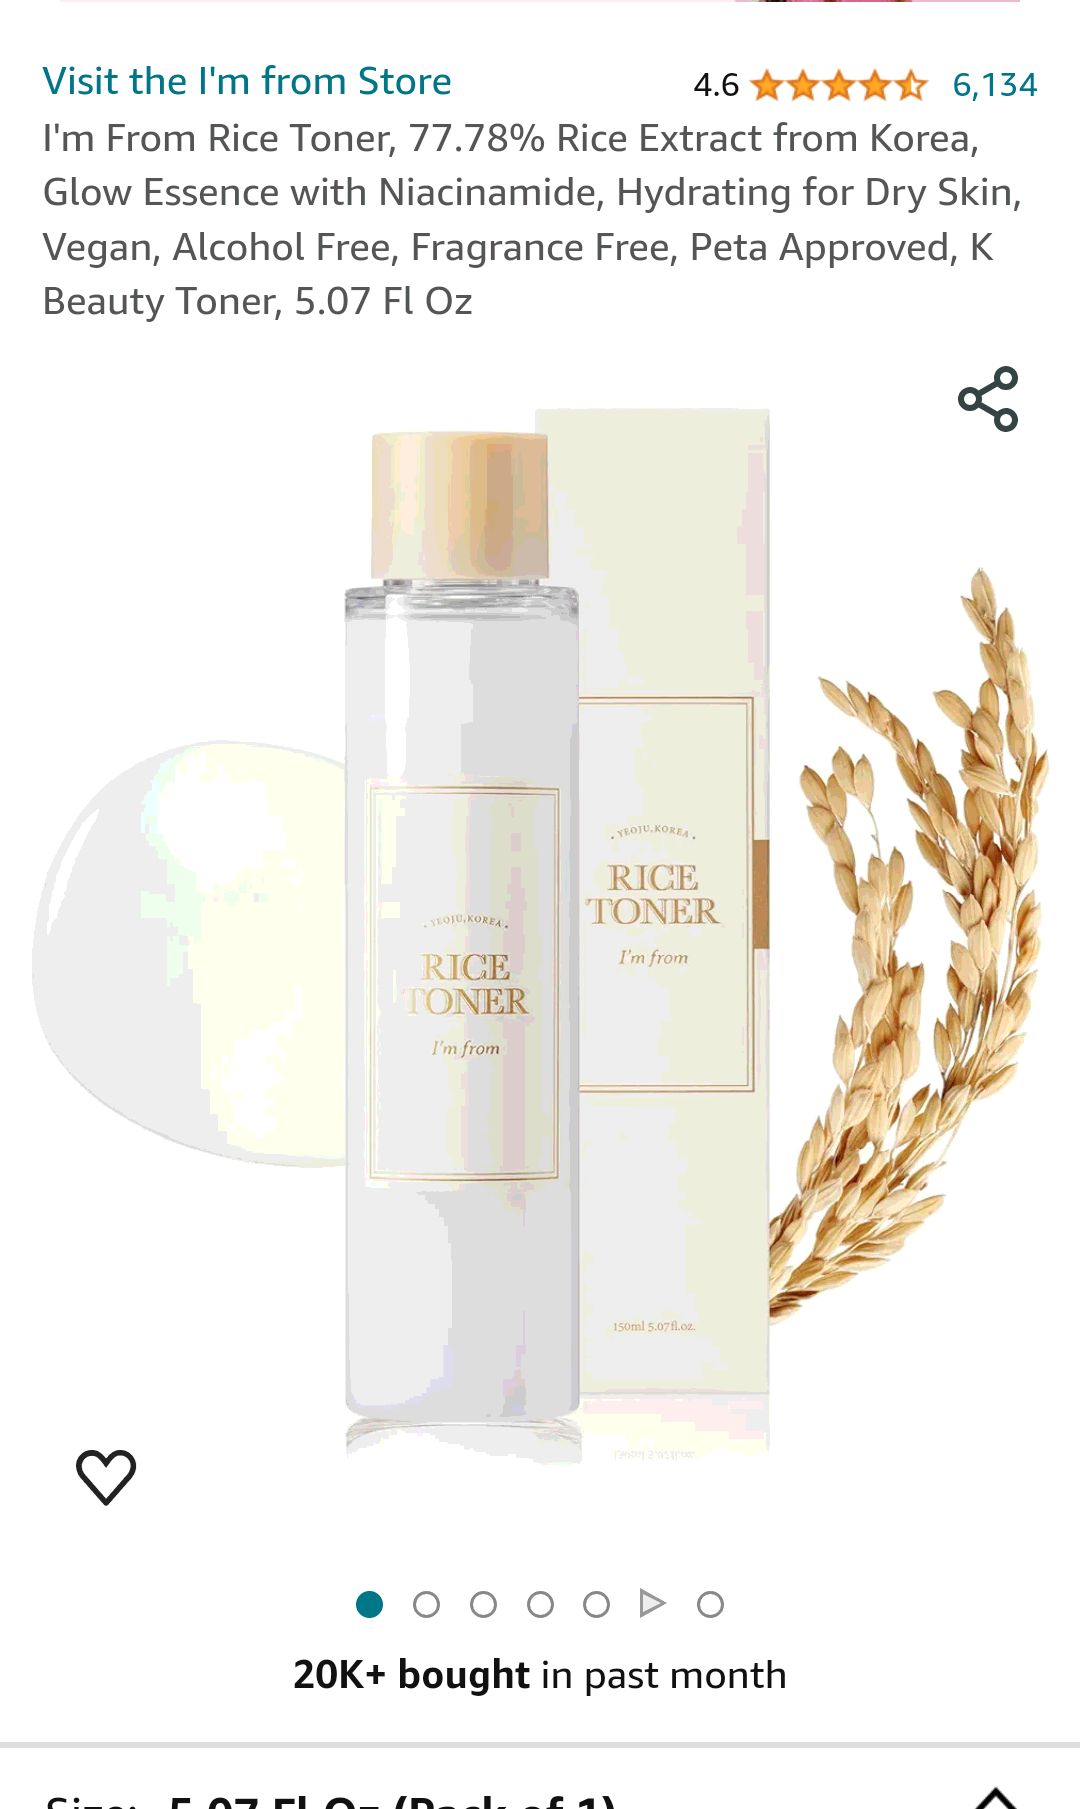 Amazon.com : I'm From Rice Toner, 77.78% Rice Extract from Korea, Glow Essence with Niacinamide, Hydrating for Dry Skin, Vegan, Alcohol Free, Fragrance Free, Peta Approved, K Beauty Toner, 5.07 Fl Oz 